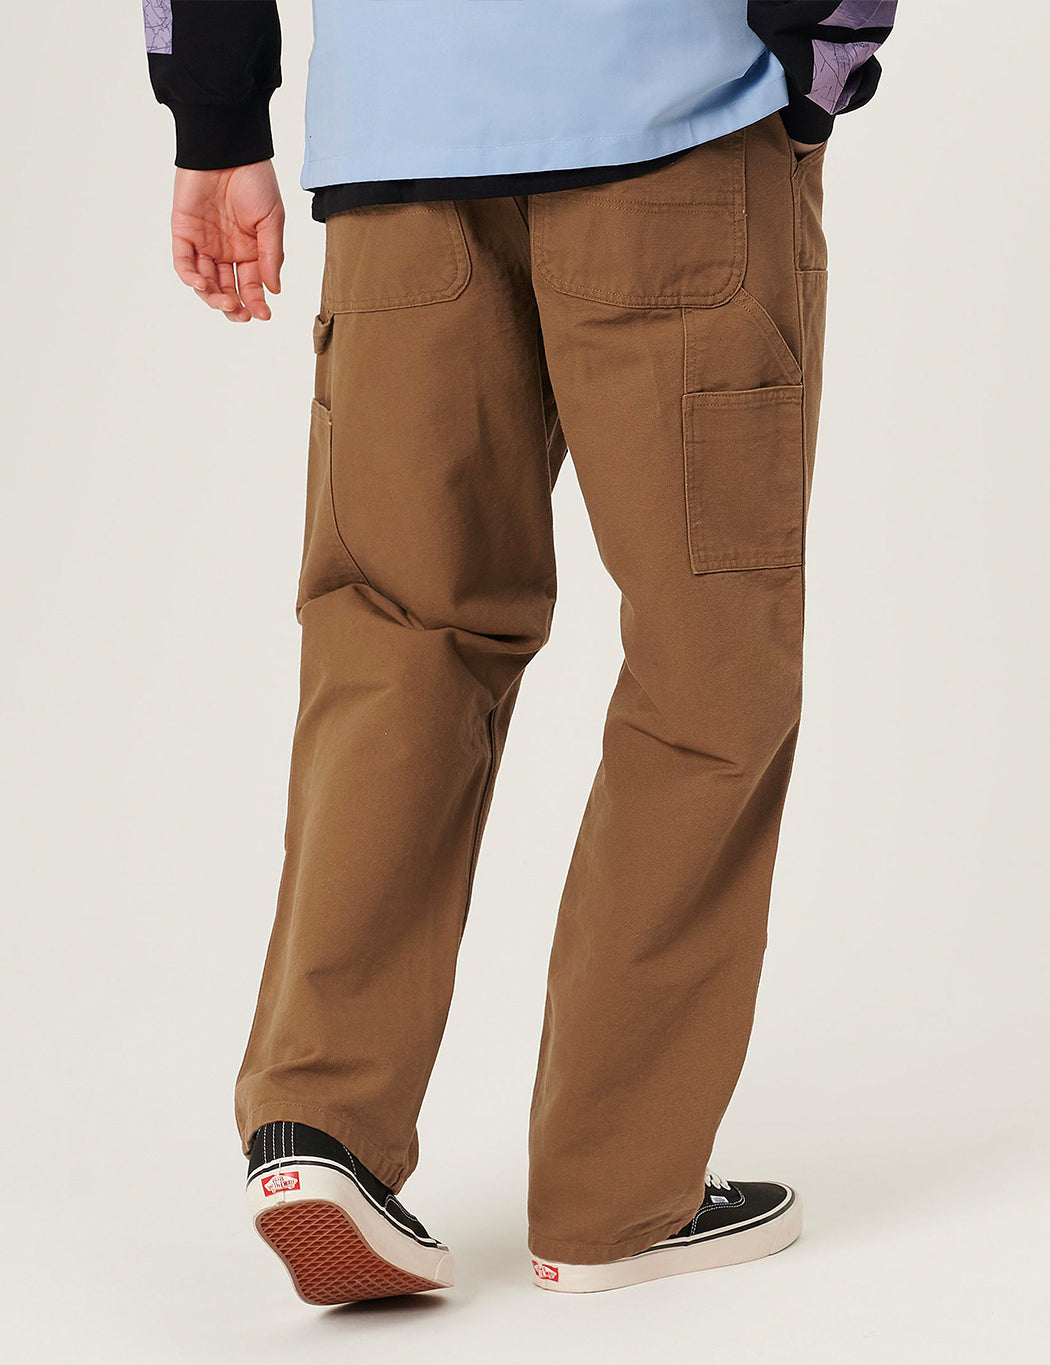 Carhartt-WIP Double Knee Pant - Hamilton Brown rinsed I URBAN EXCESS.